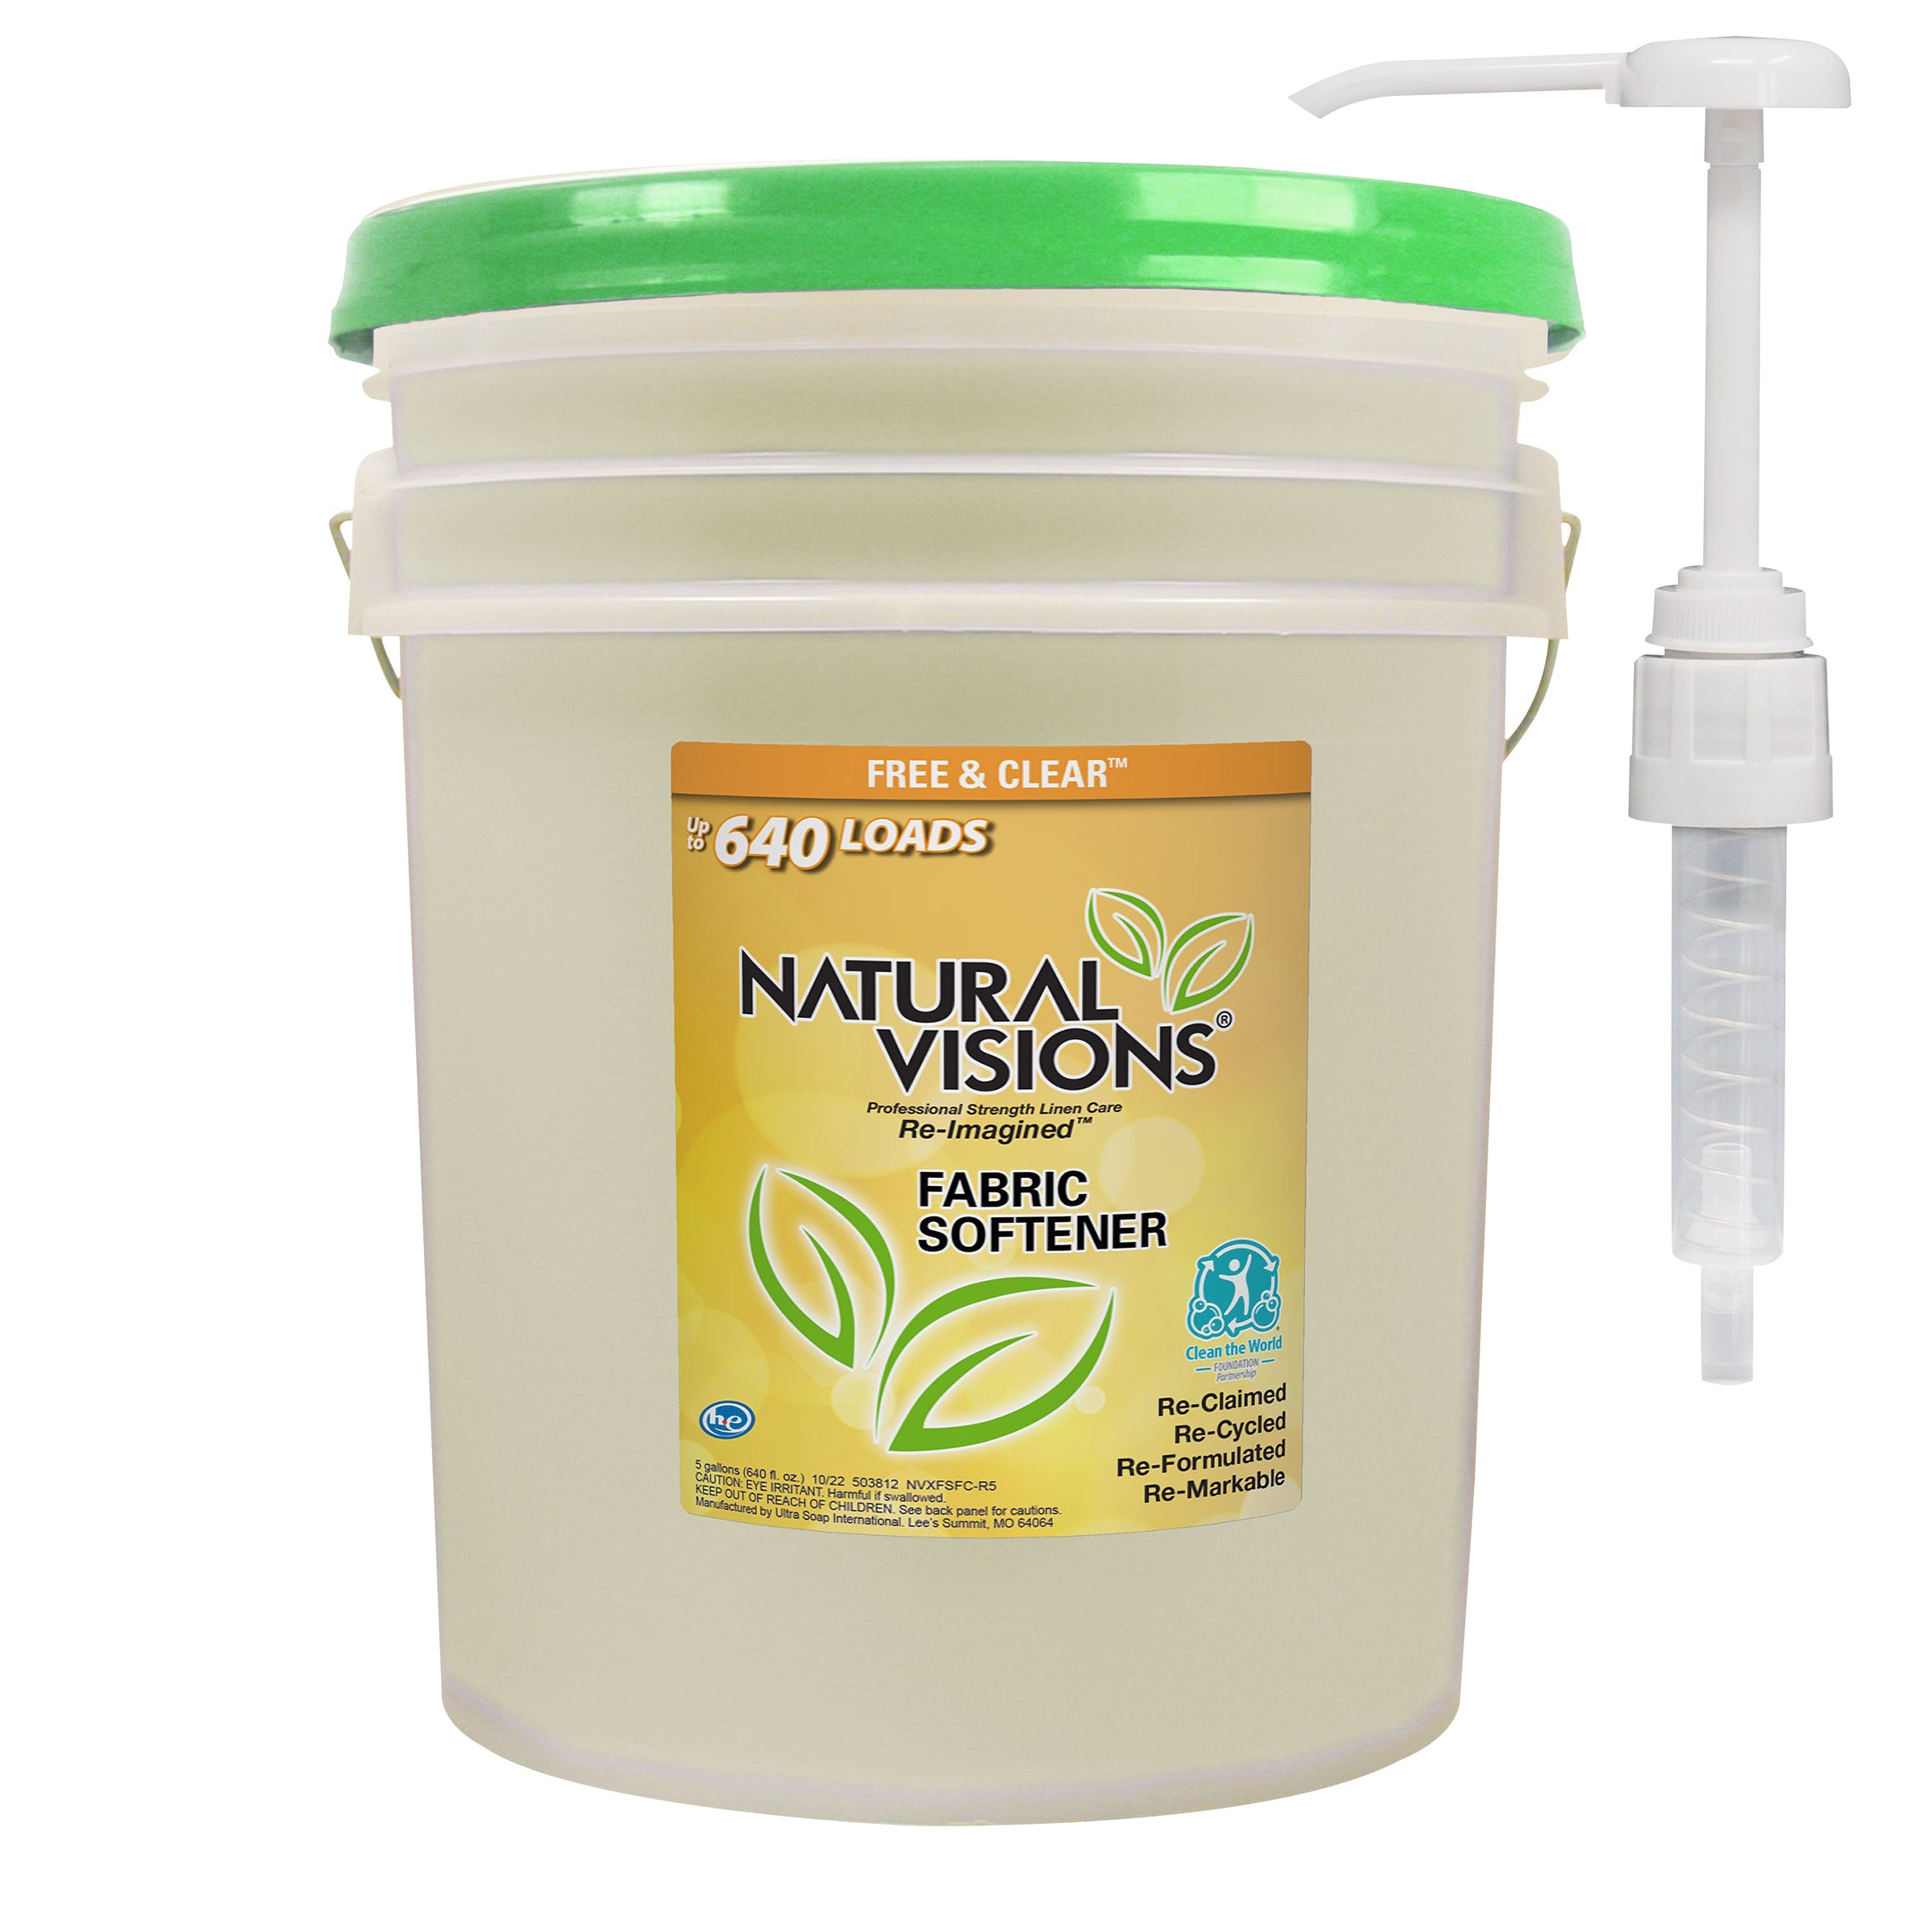 Natural Visions Free & Clear Fabric Softener Bucket - 640oz/1pk